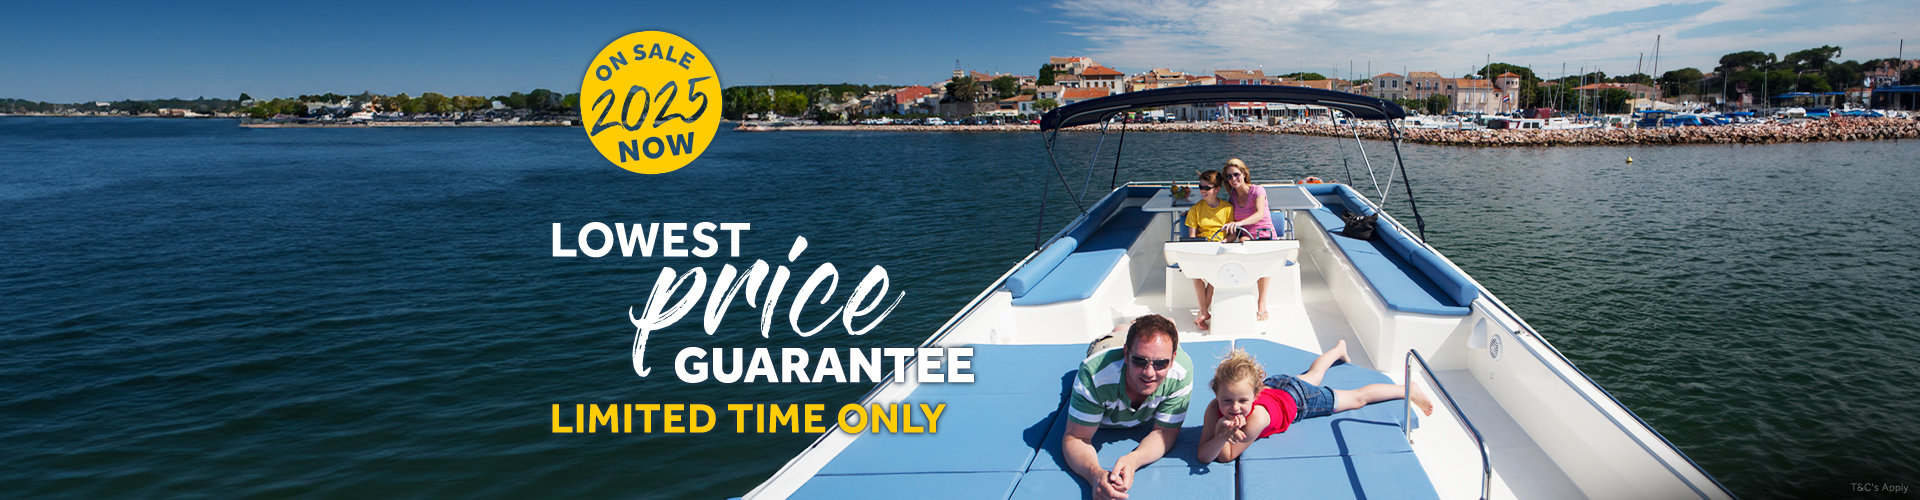 Le Boat - Lowest Price Guarantee on 2025 holidays